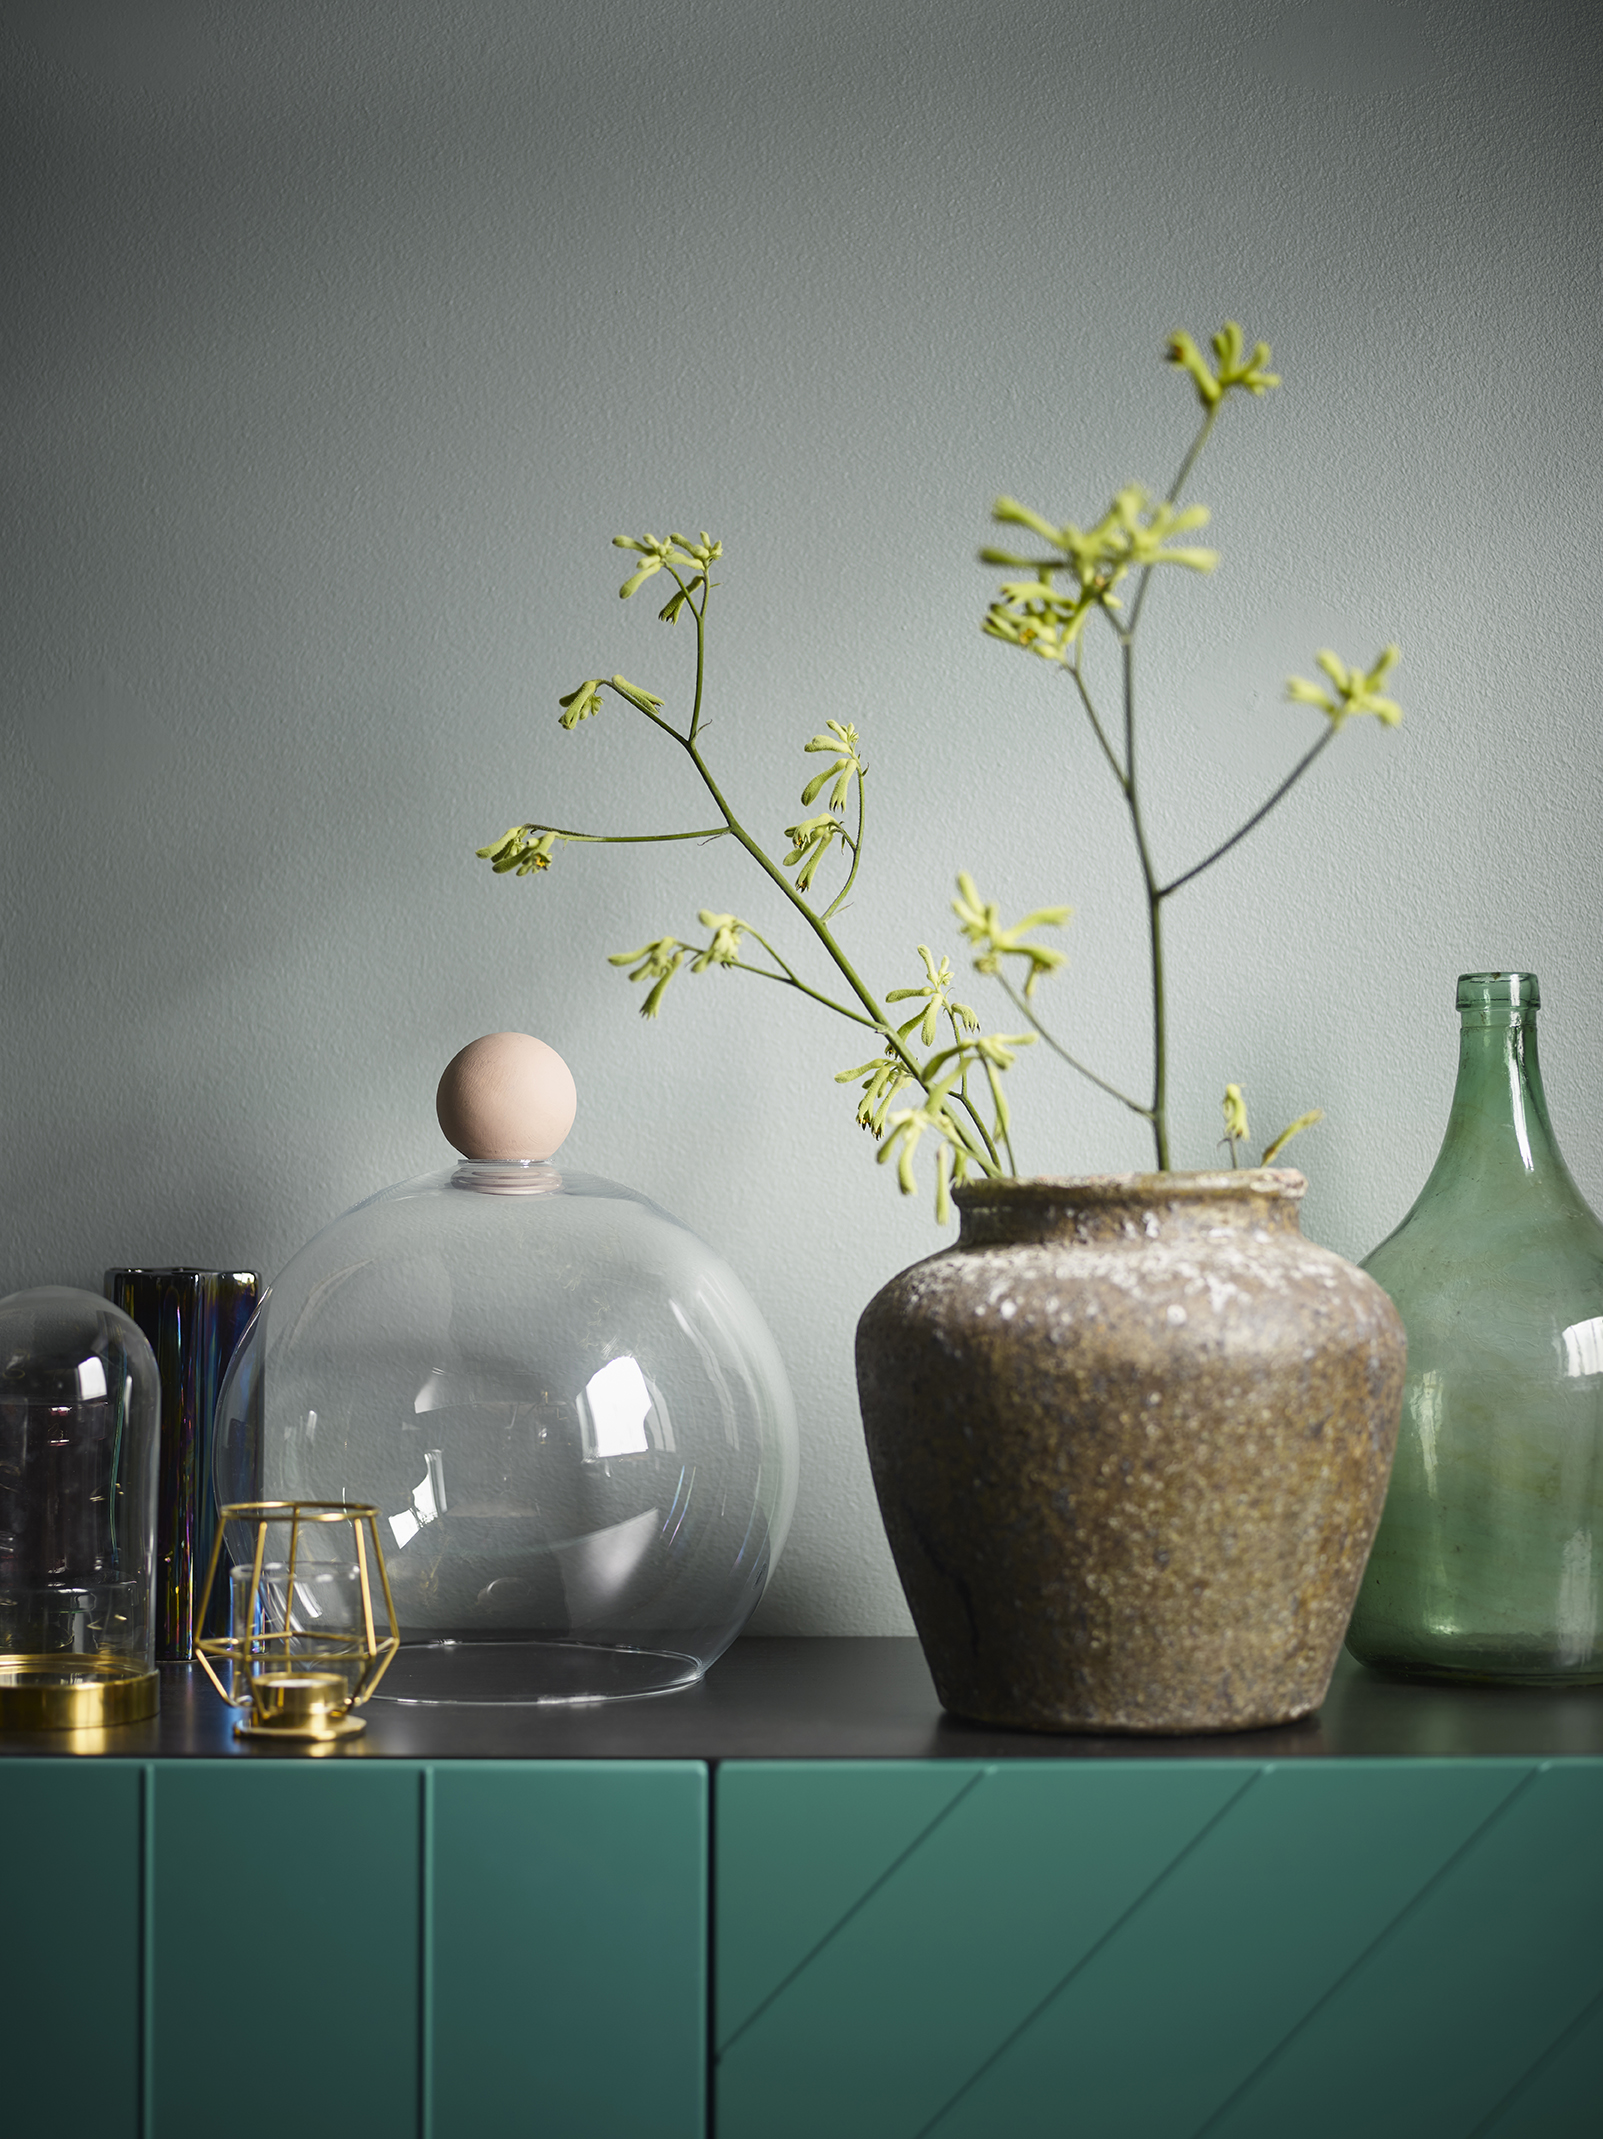 IKEA console styles with vases and lamps